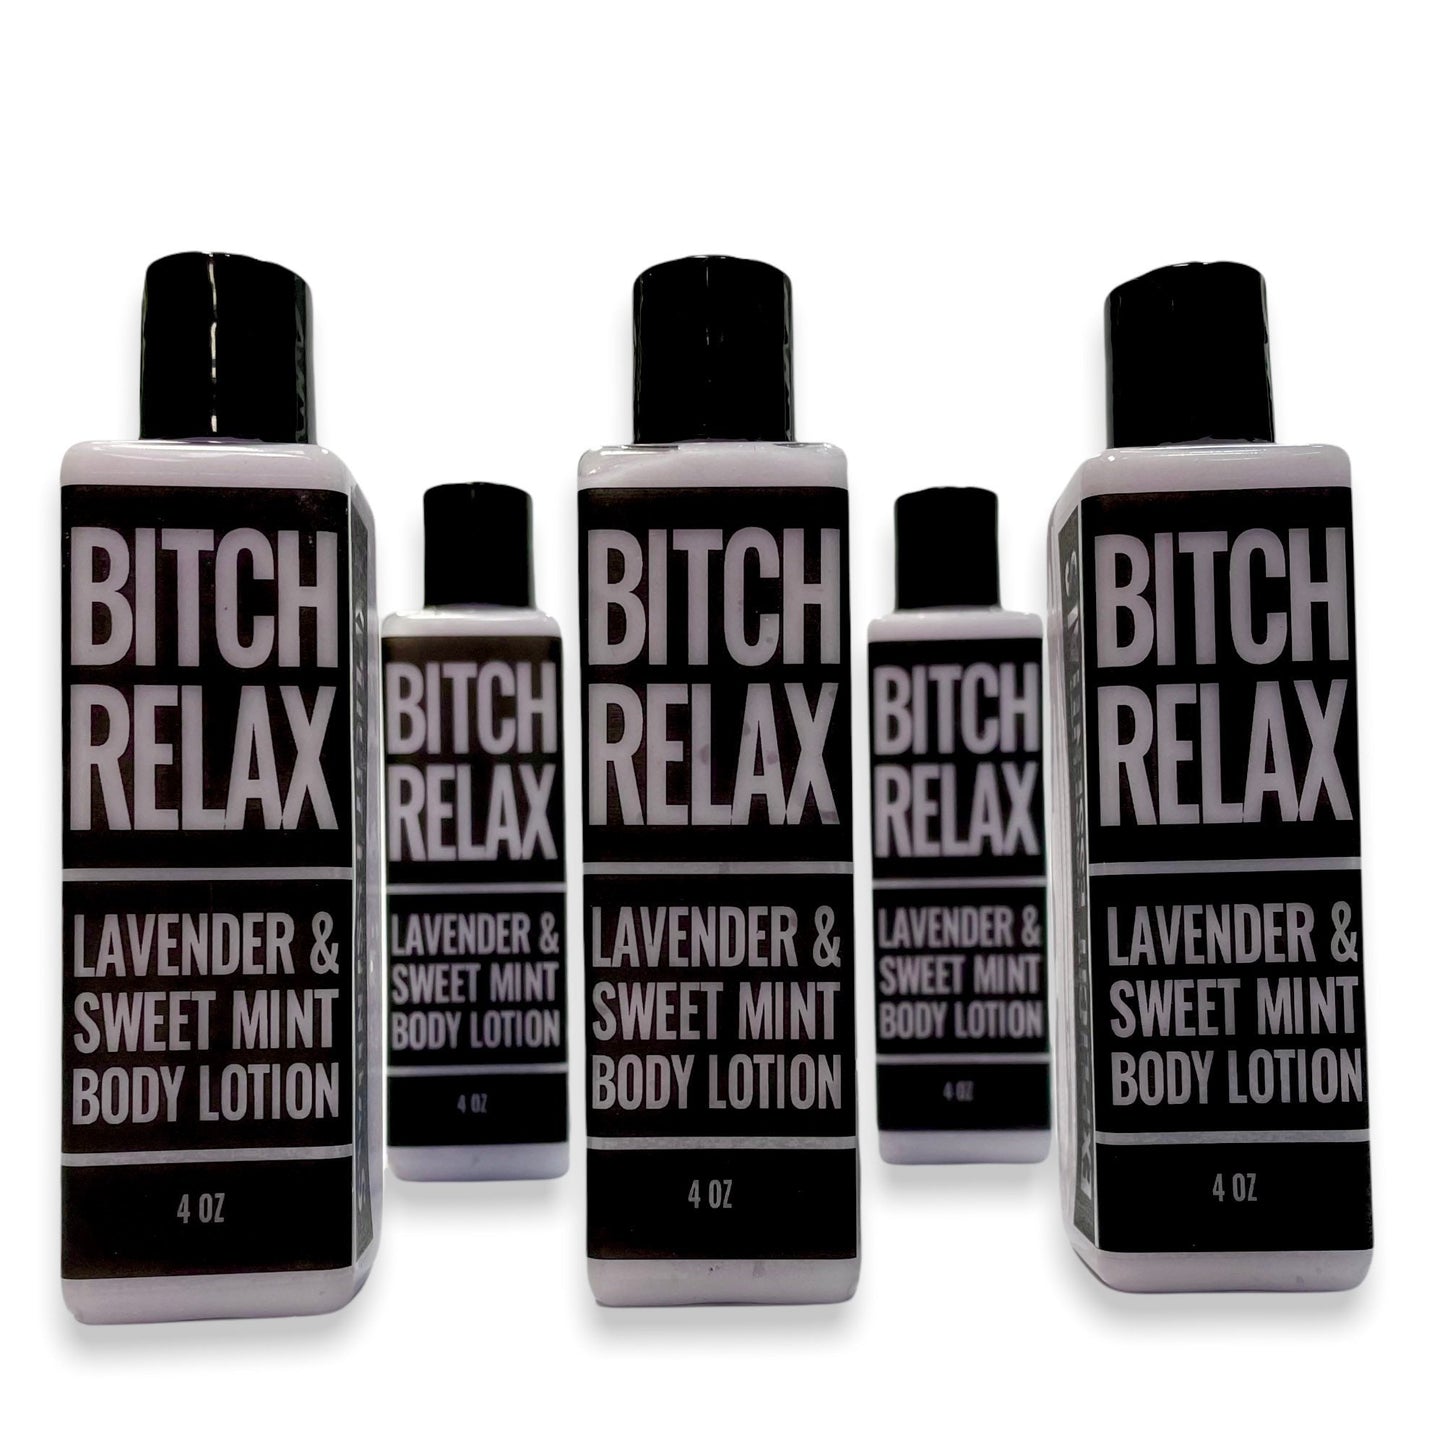 Bitch Relax Hand & Body Lotion